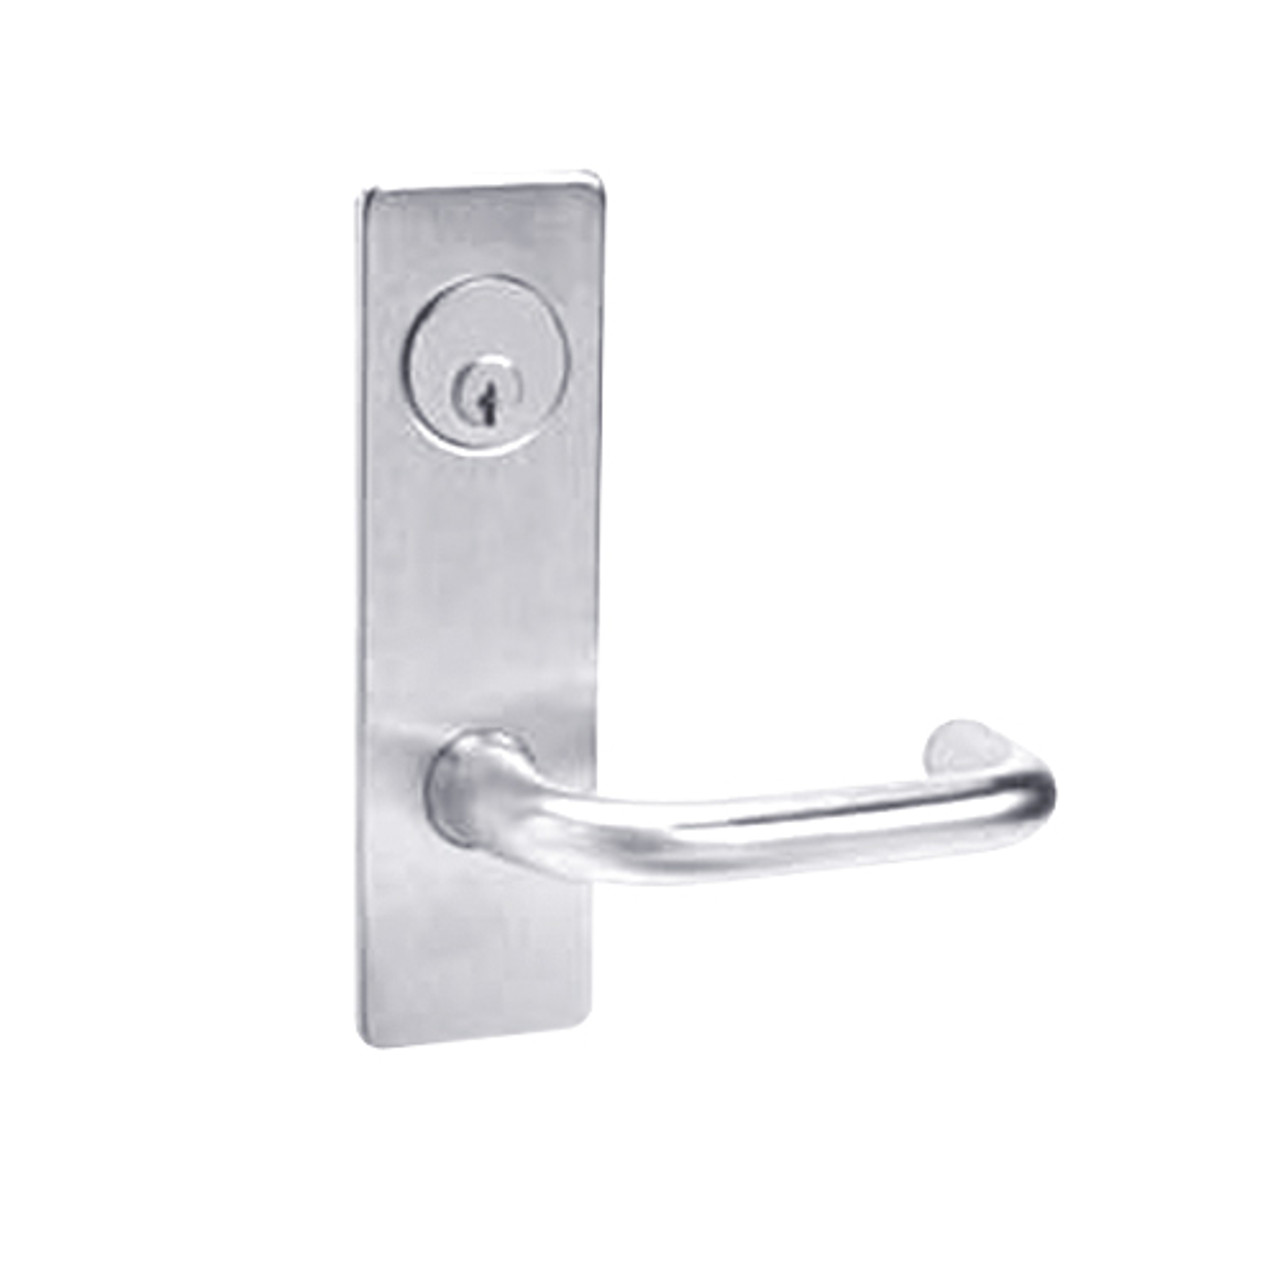 ML2003-LWR-625 Corbin Russwin ML2000 Series Mortise Classroom Locksets with Lustra Lever in Bright Chrome